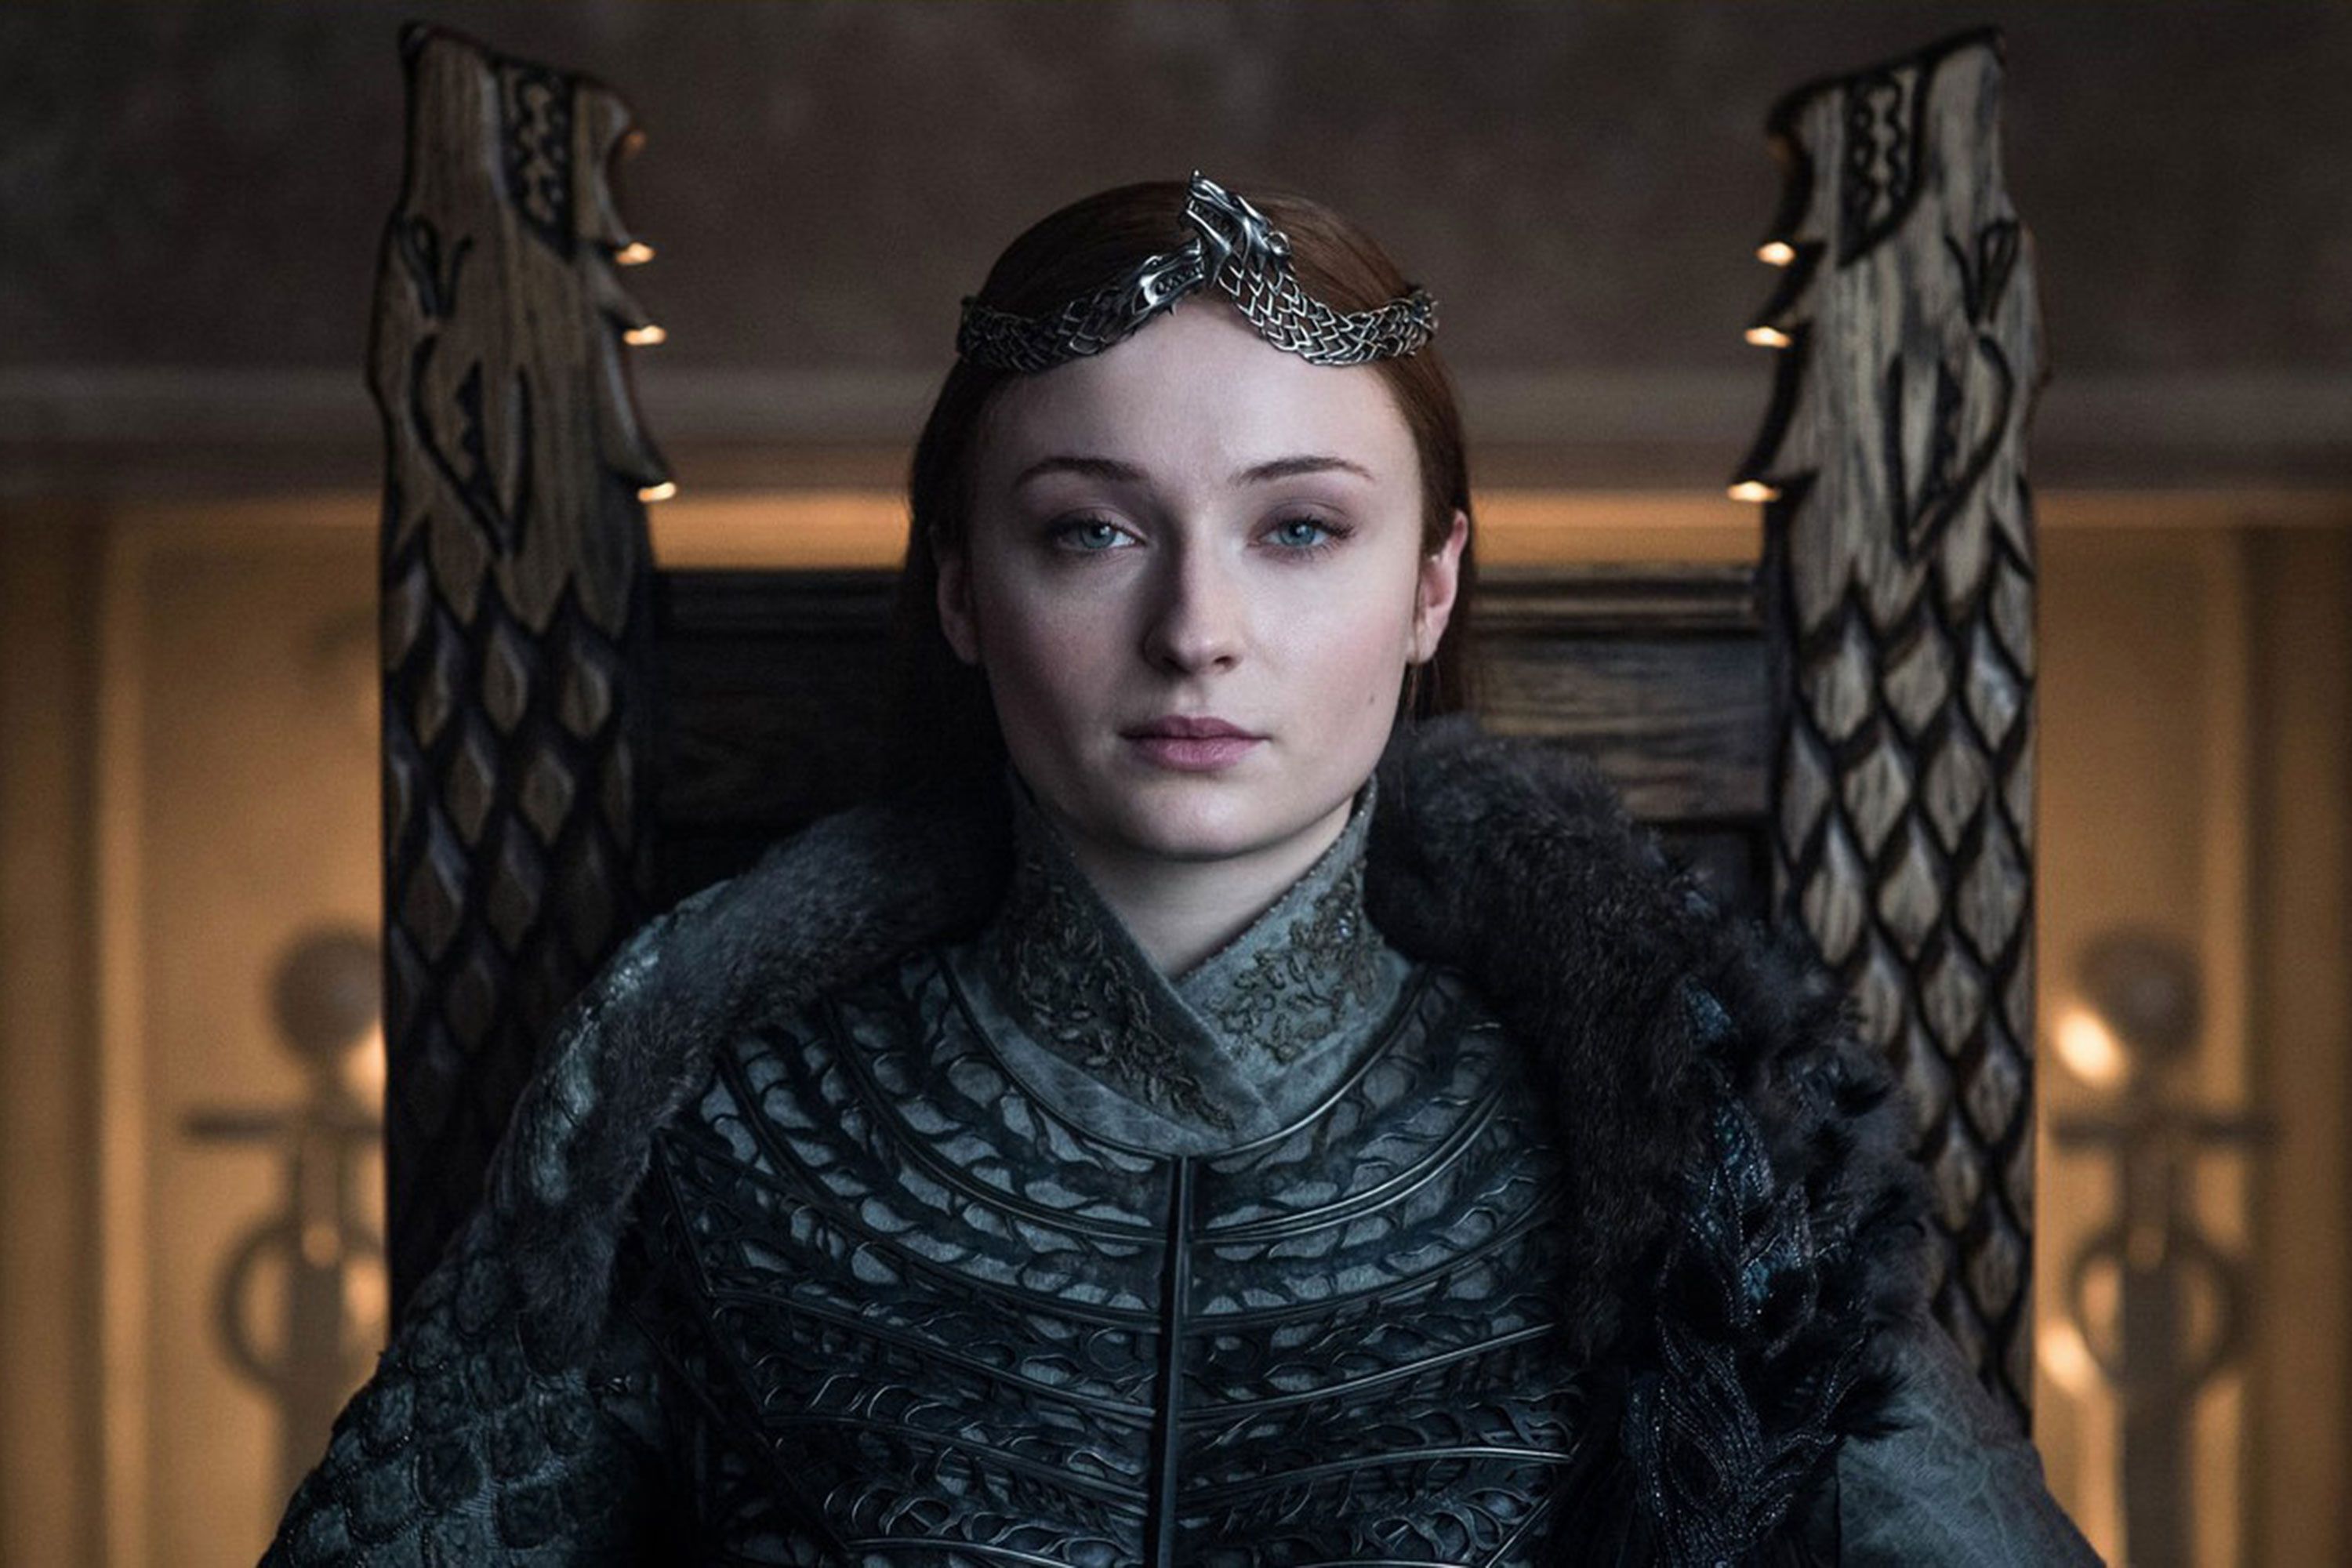 Sophie Turner Says Her 'GoT' Co-Star Maisie Williams Will Be Maid